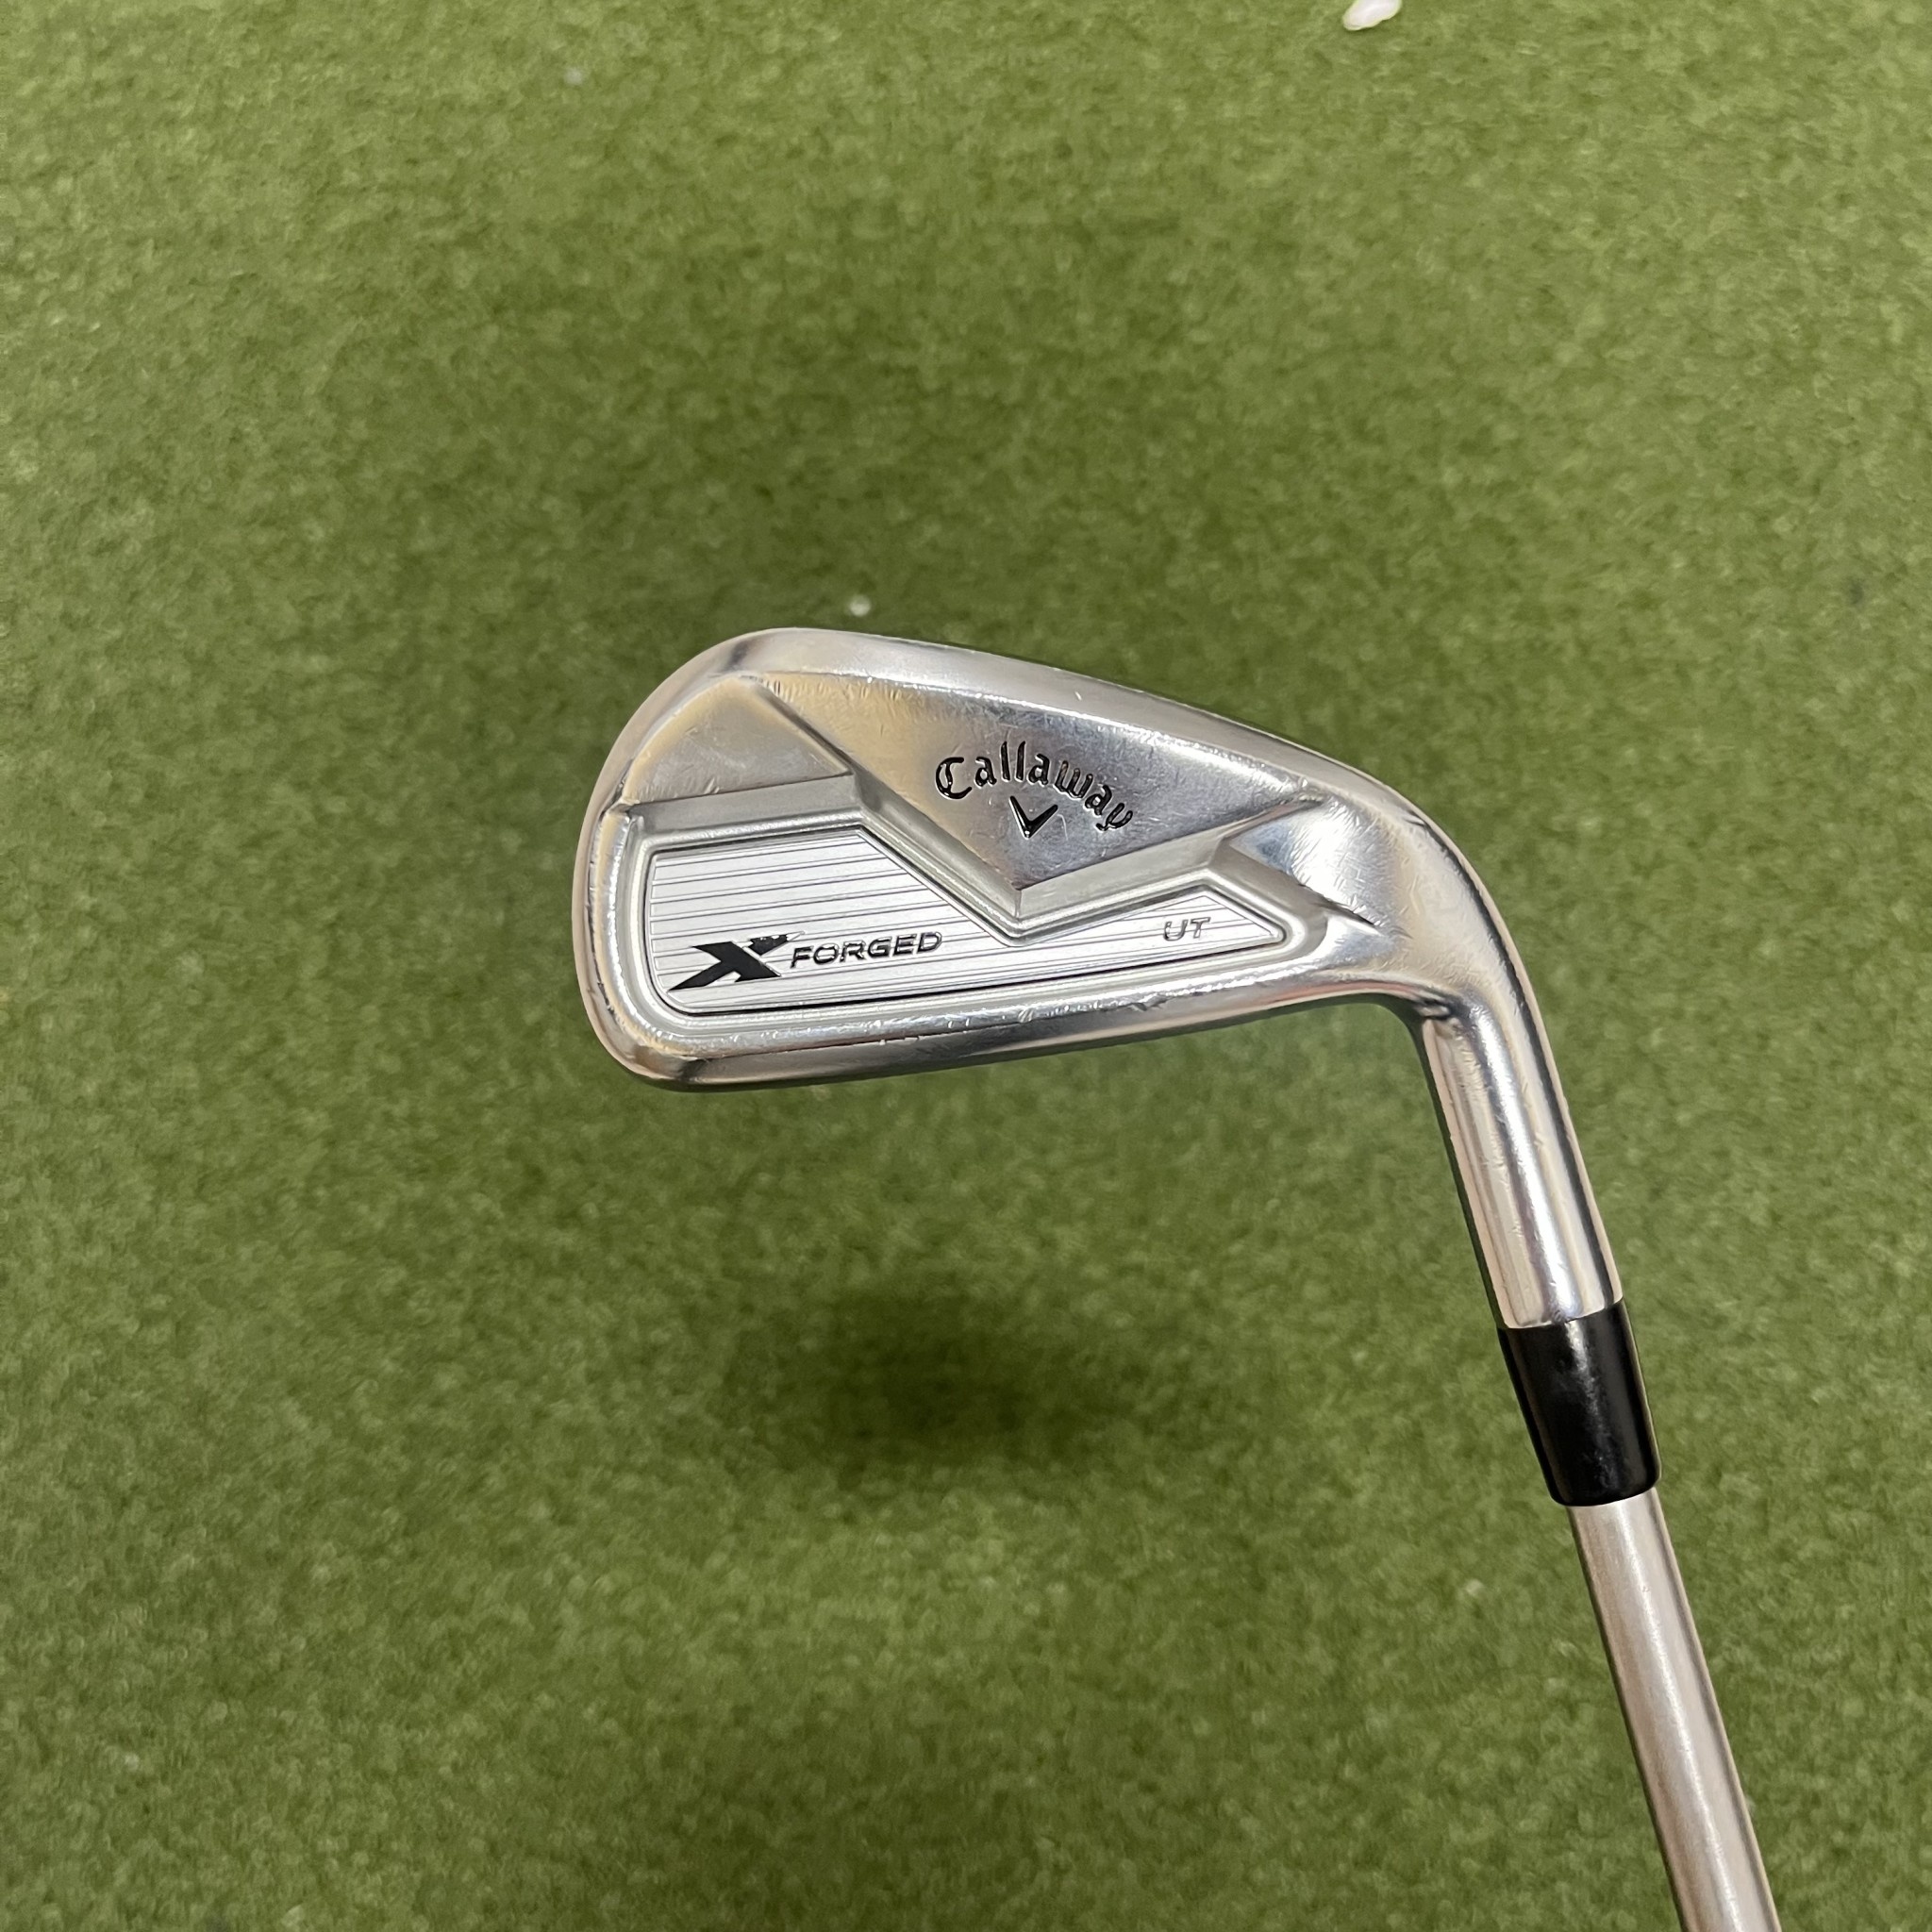 (Pre-owned) Callaway X Forged UT 21* Driving Iron KBS Tour C 